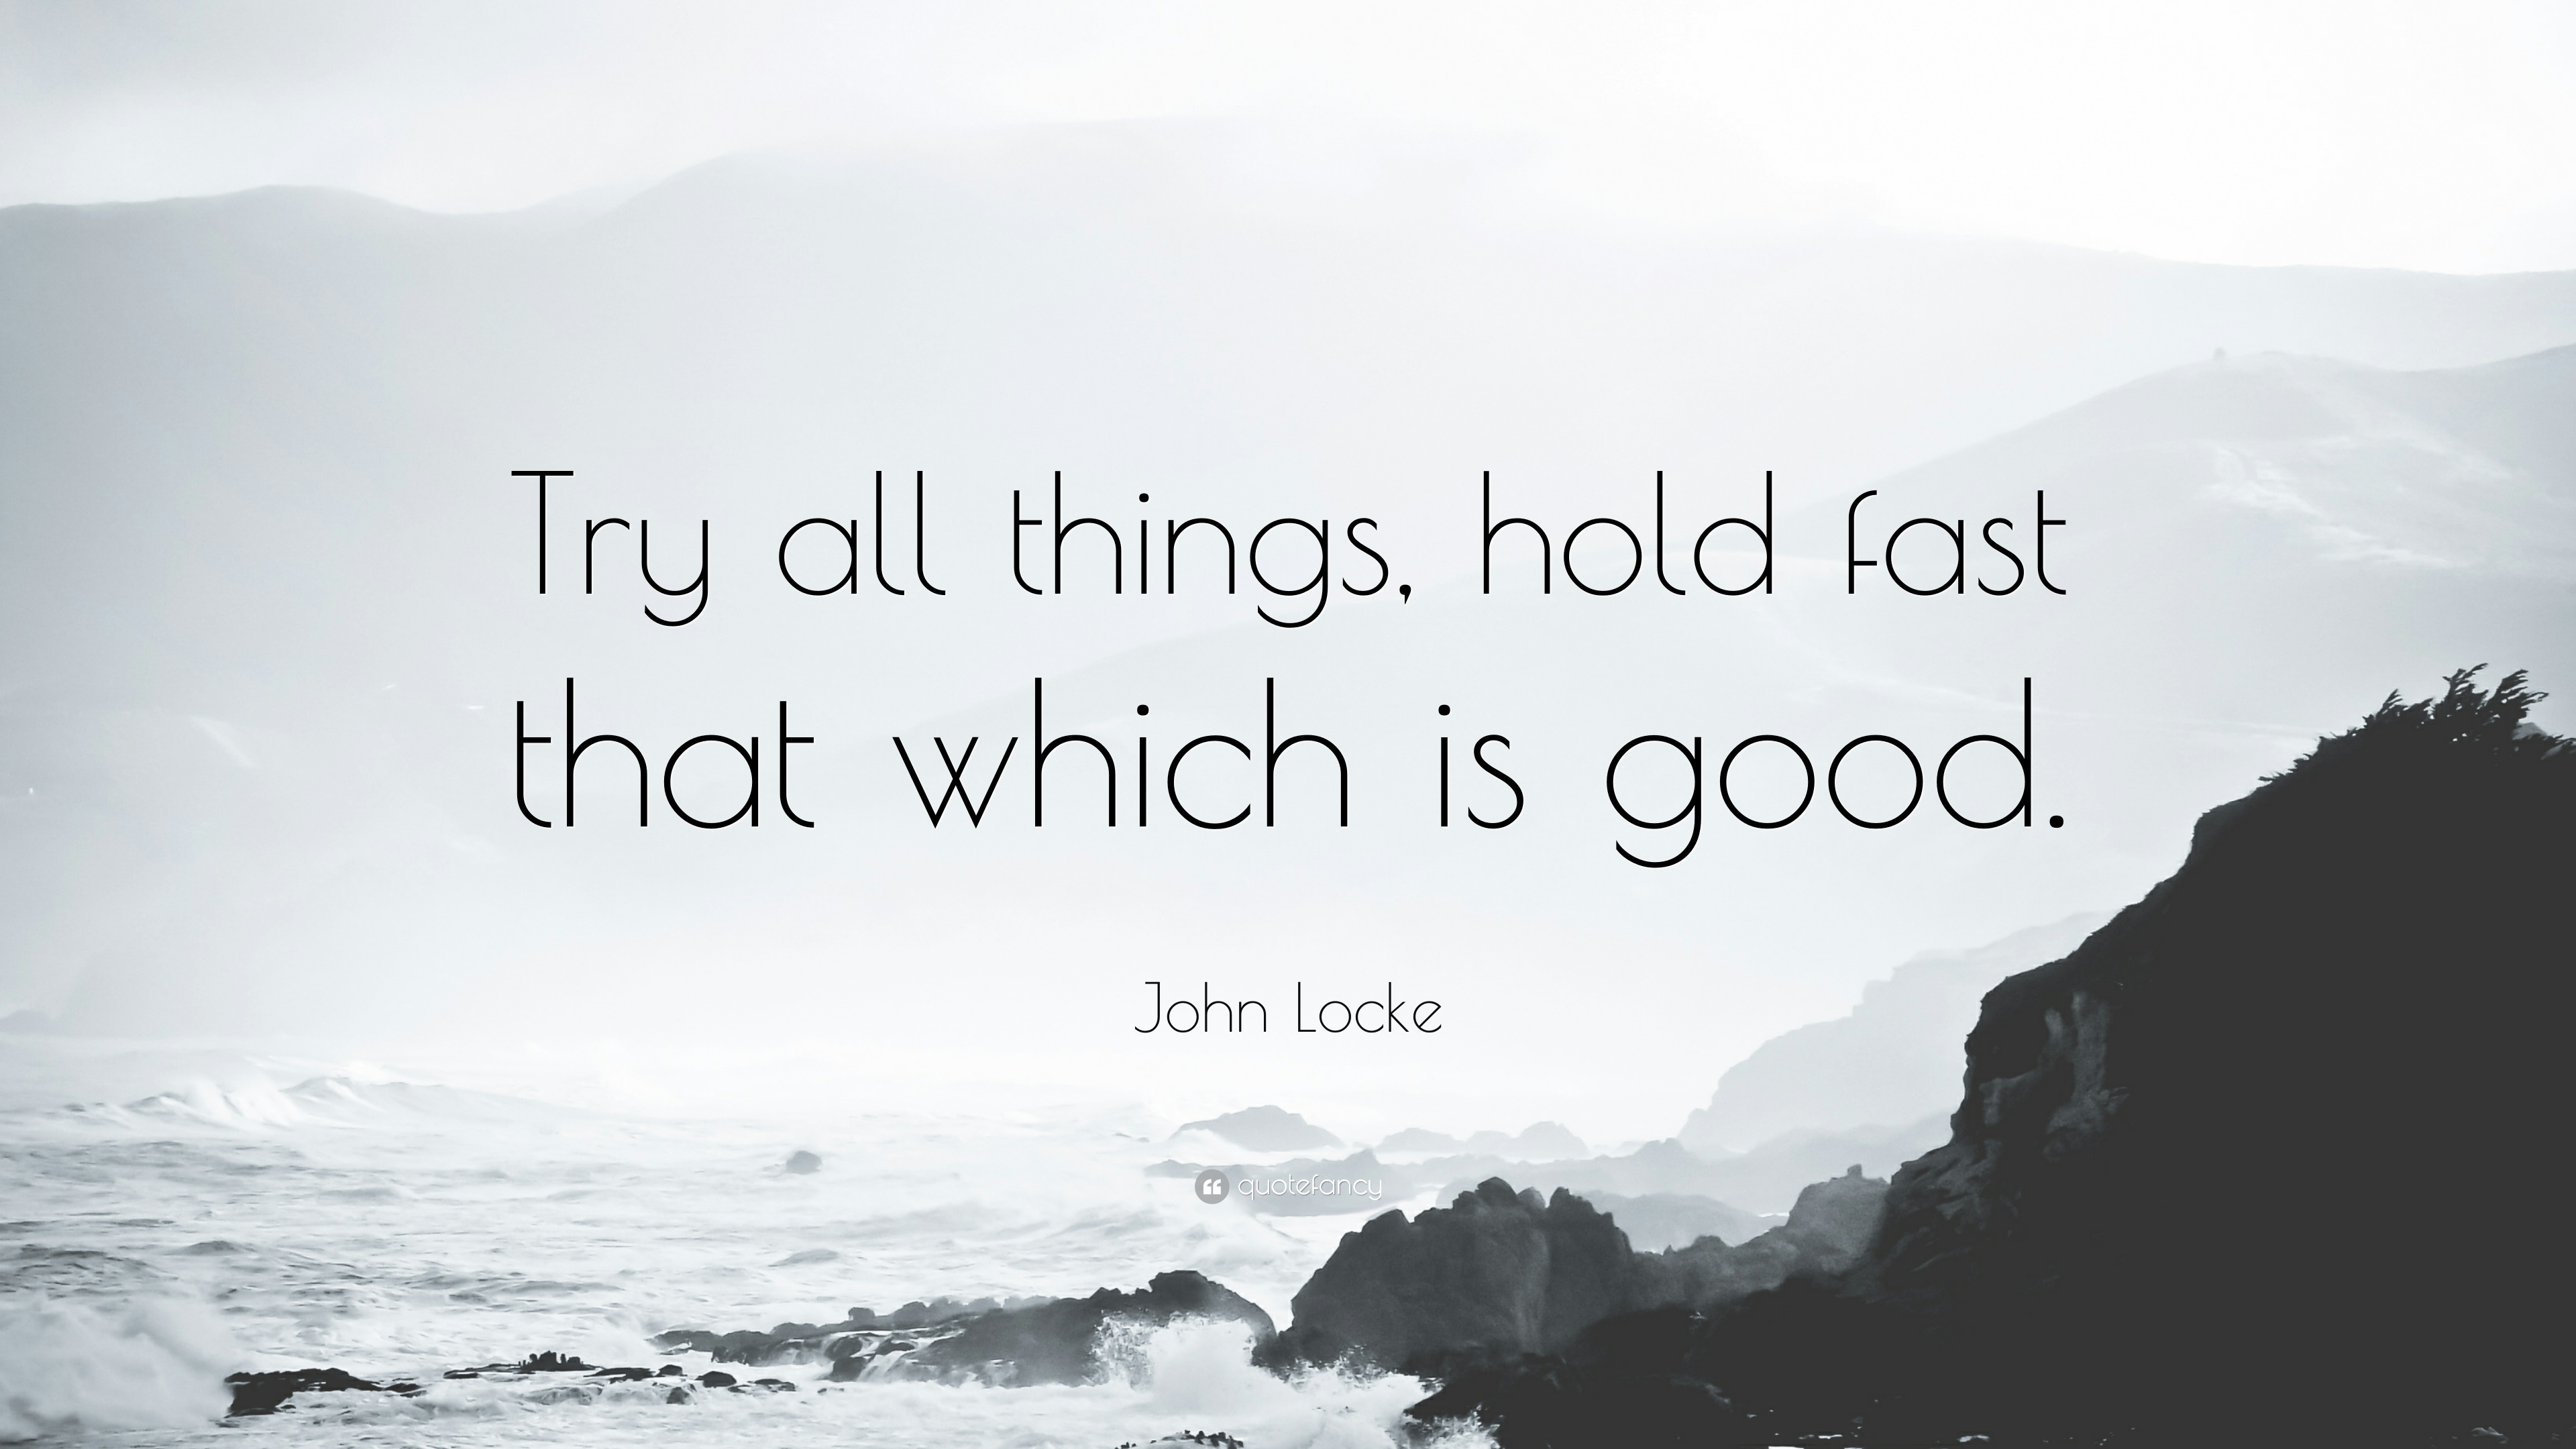 John Locke Quote: “Try all things, hold fast that which is good ...